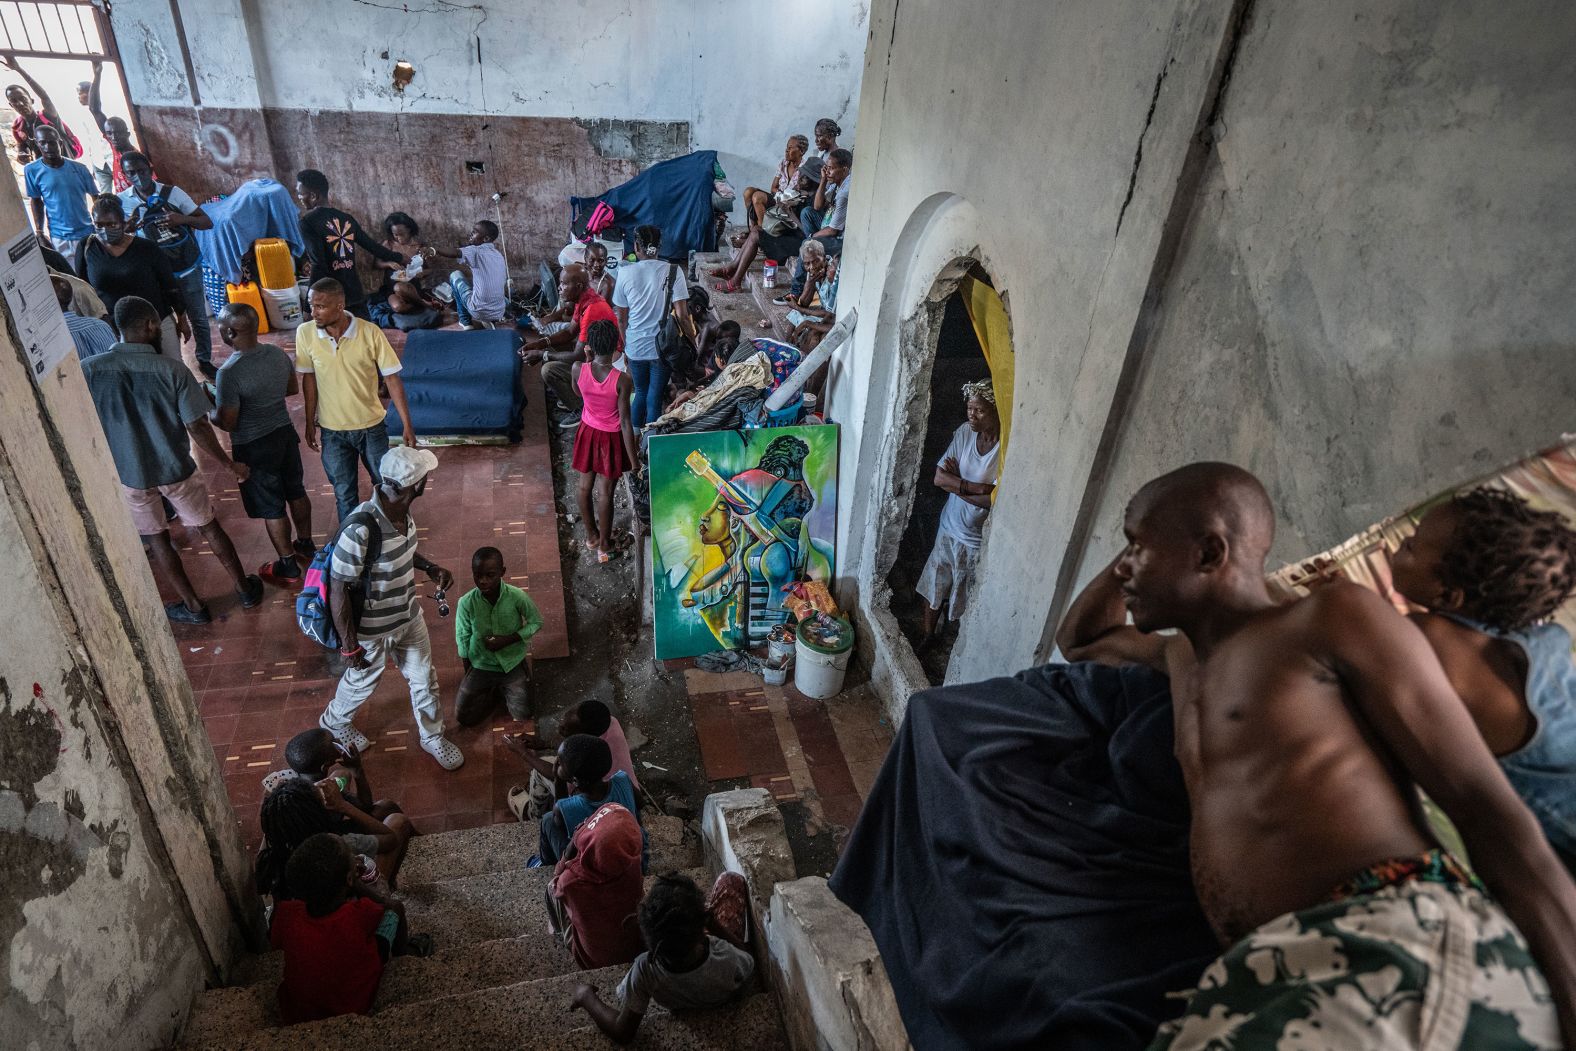 Displaced Haitians take shelter at the Rex Medina theater in downtown Port-au-Prince. The former theater was closed after the country's devastating earthquake in 2010, but it was reopened in August by a group of local residents seeking safety from gangs.